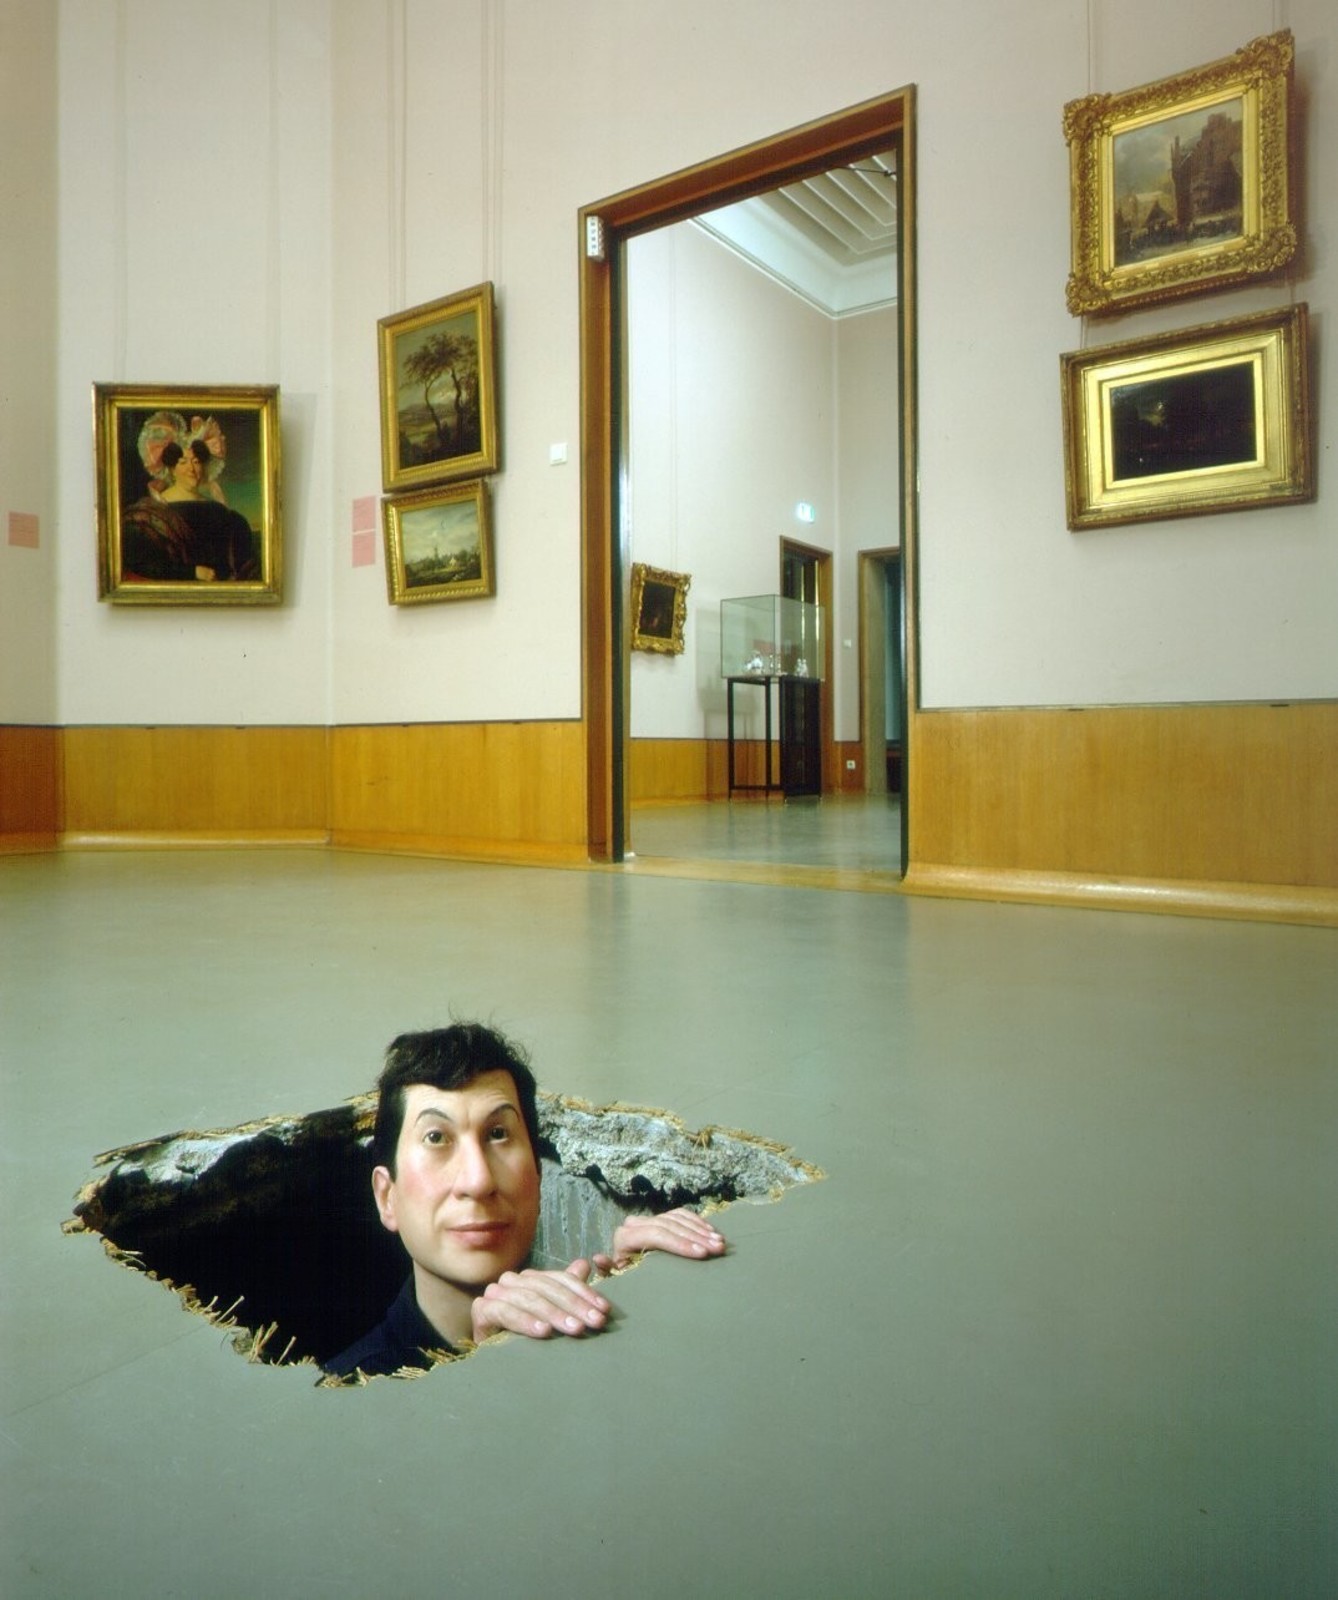 Maurizio Cattelan. Untitled. 2001. Wax, pigment, human hair, fabric, polyester resin. 150 x 50 x 32 cm. Galerie Perrotin (Lille, France).